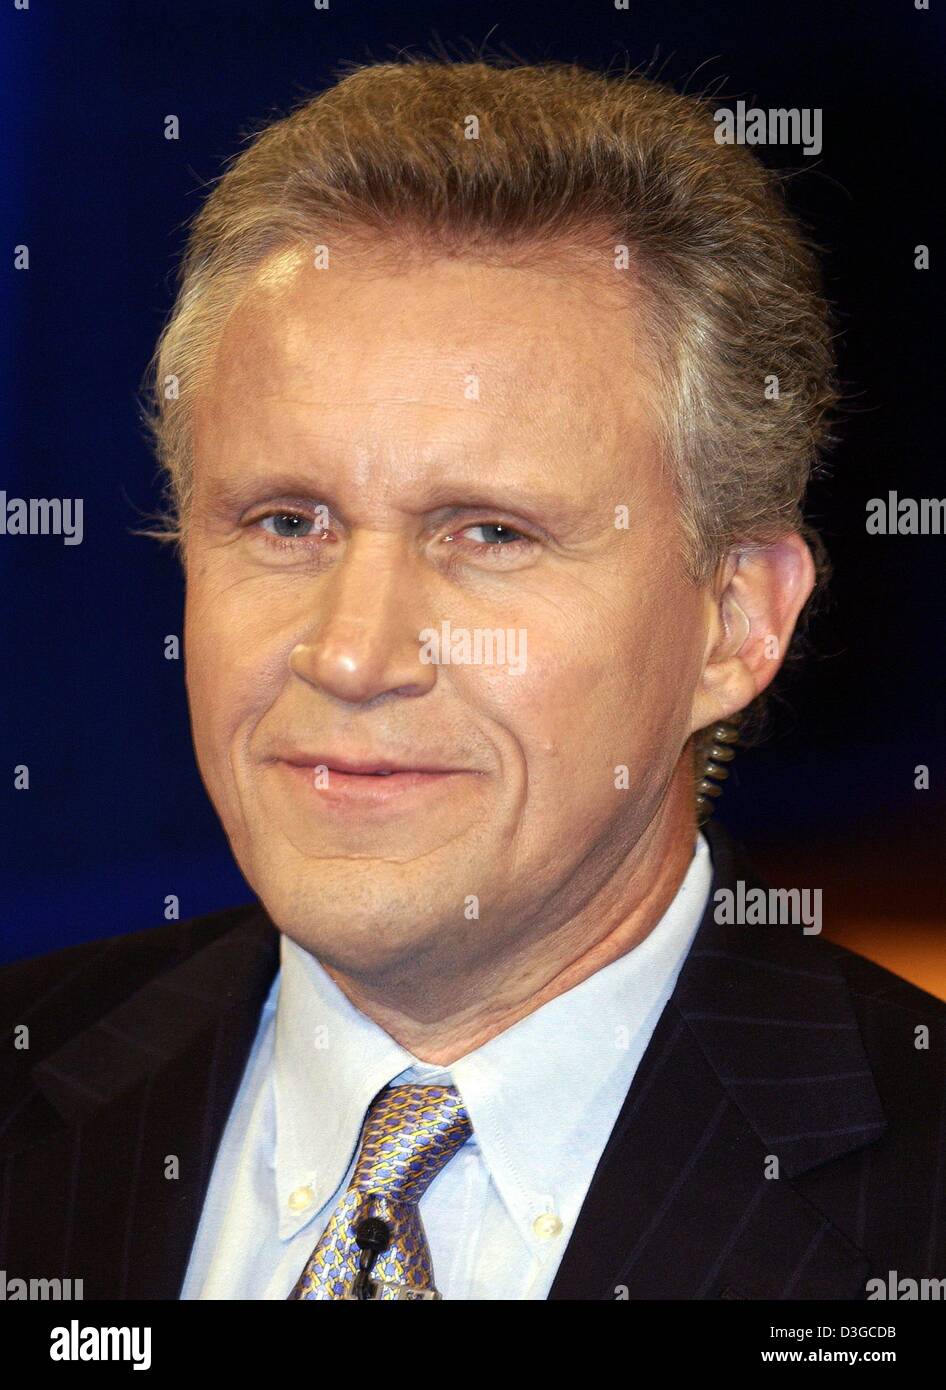 (dpa) - Jeffrey Immelt, chairman of US conglomerate General Electric (GE), smiles during a talk show on German television in Berlin, Germany, 17 October 2004. The television show centred on the dire economic state of the German automotive sector. Stock Photo